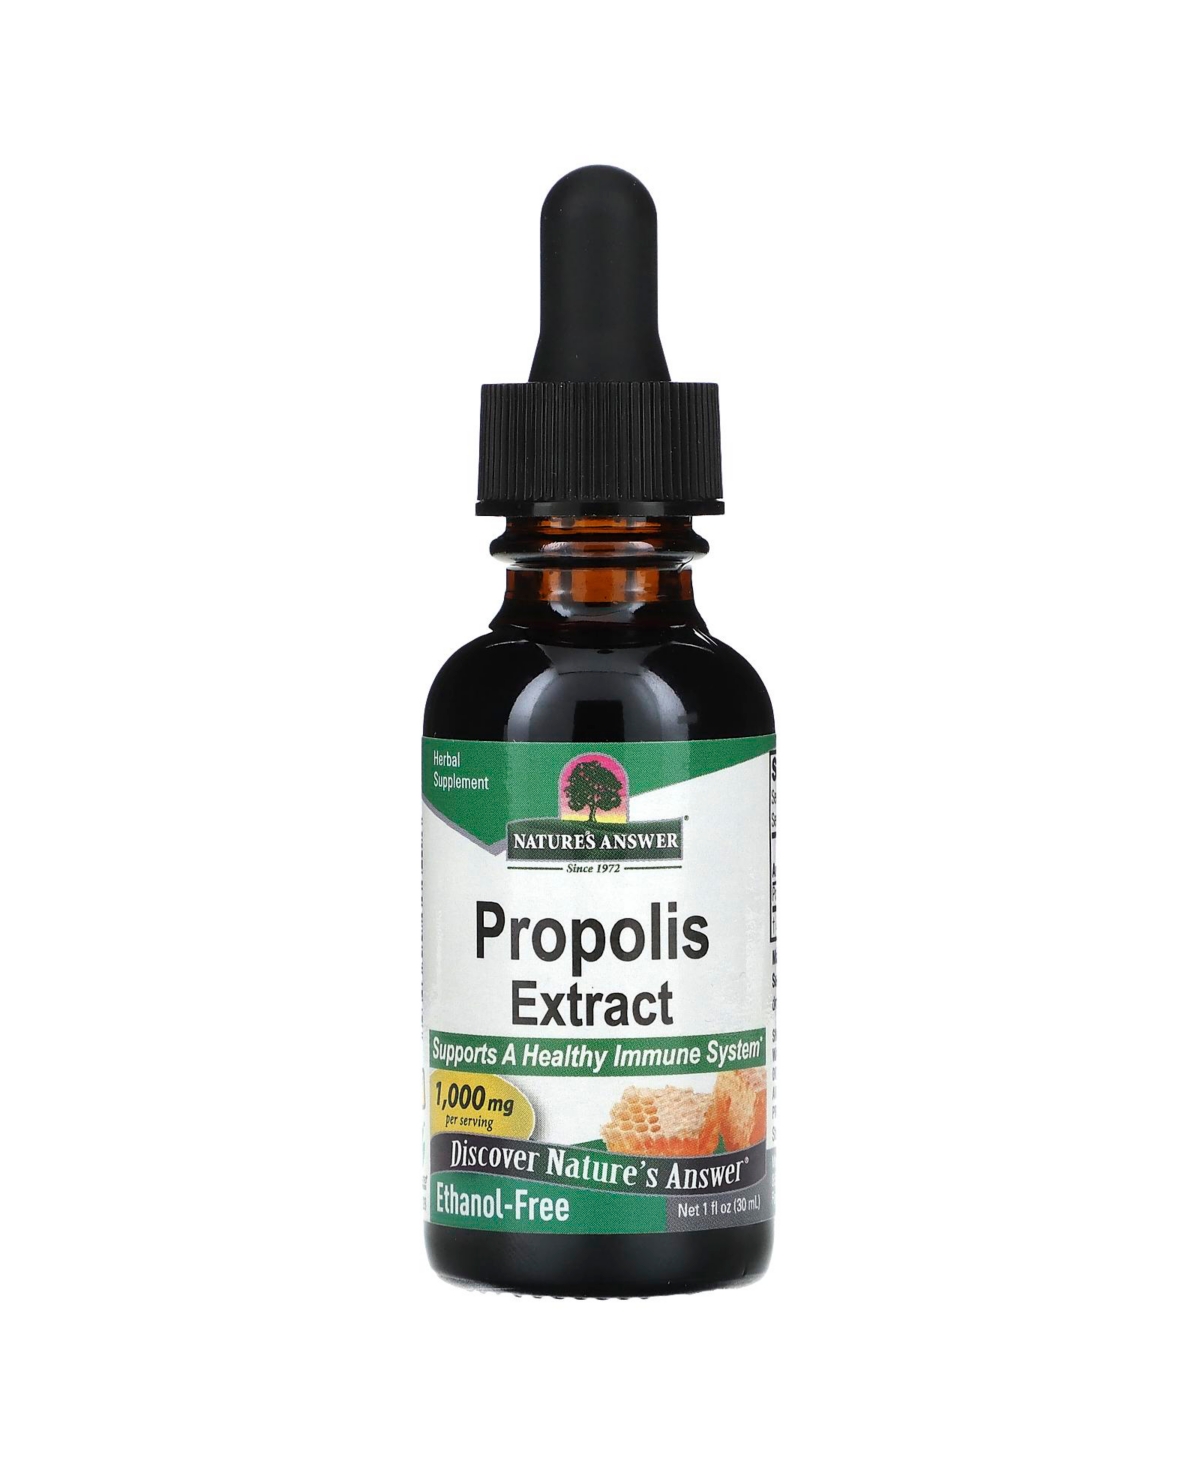 Propolis Extract Alcohol-Free 1 000 mg - 1 fl oz (30 ml) - Assorted Pre-pack (See Table